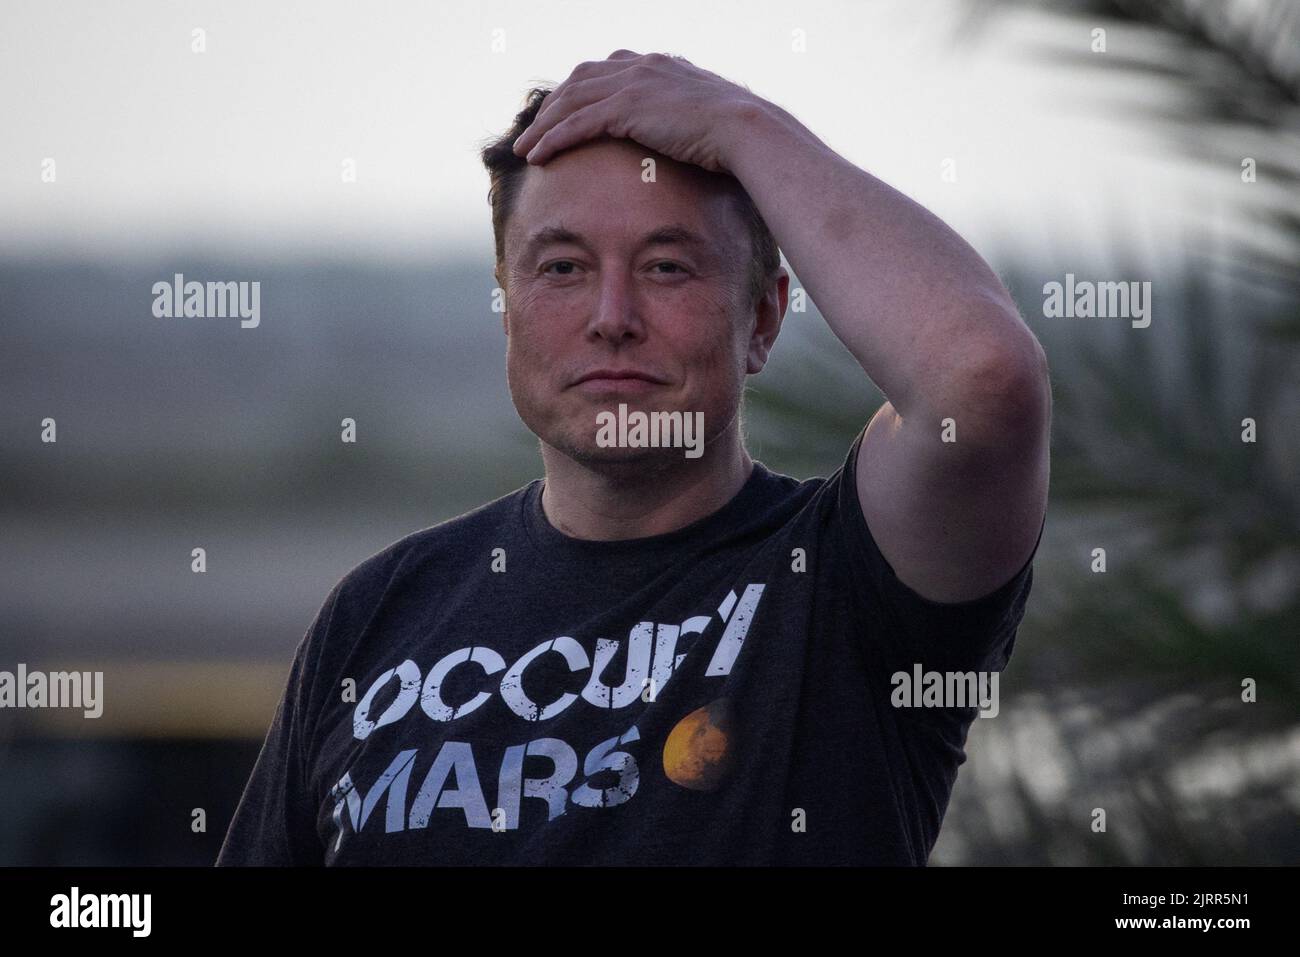 SpaceX Chief Engineer Elon Musk takes part in a joint news conference with T-Mobile CEO Mike Sievert (not pictured) at the SpaceX Starbase, in Brownsville, Texas, U.S., August 25, 2022. REUTERS/Adrees Latif Stock Photo